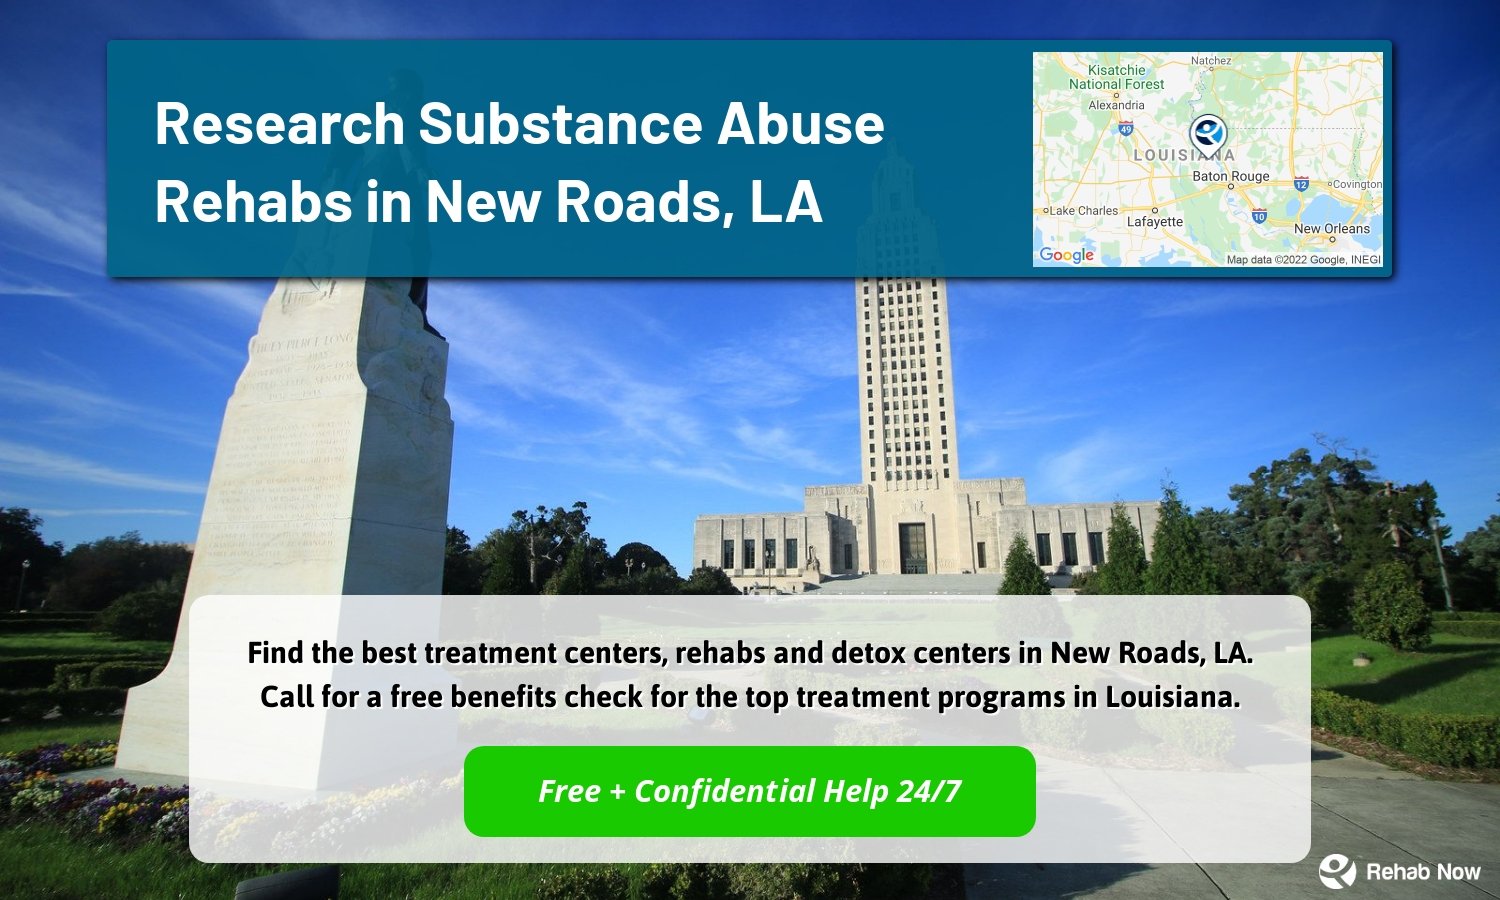 Find the best treatment centers, rehabs and detox centers in New Roads, LA. Call for a free benefits check for the top treatment programs in Louisiana.